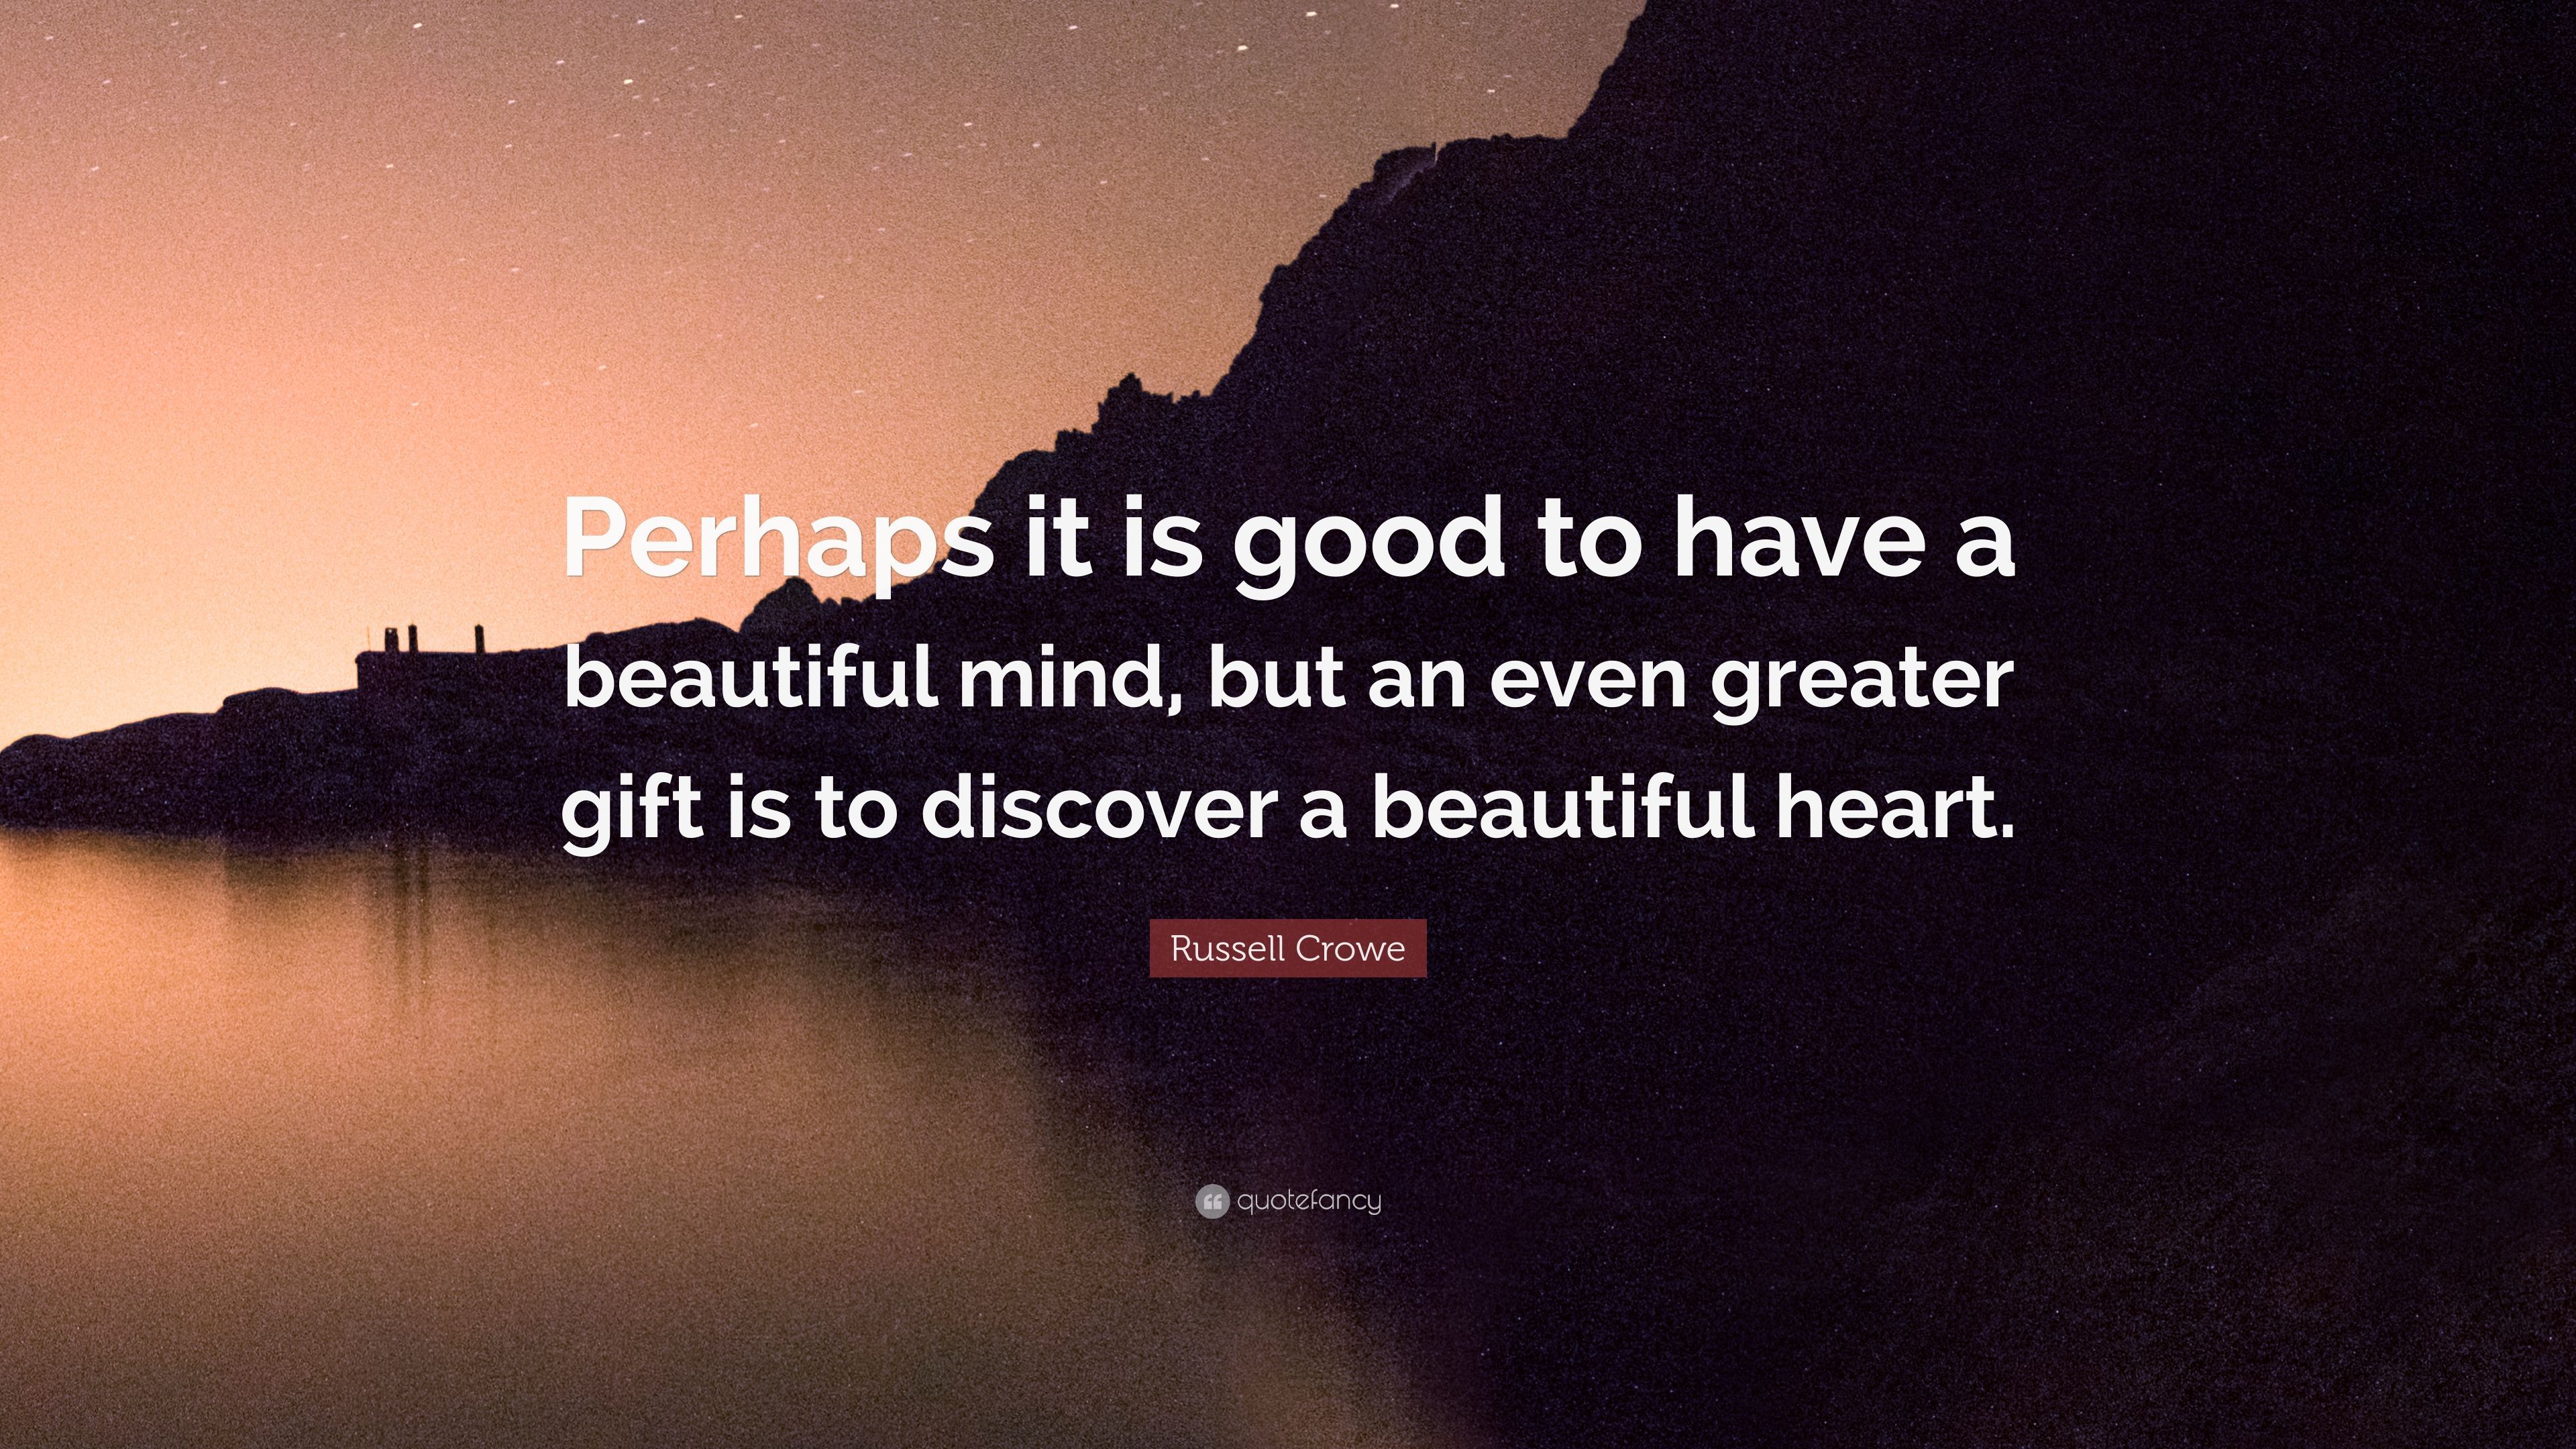 Russell Crowe Quote: “Perhaps it is good to have a beautiful mind